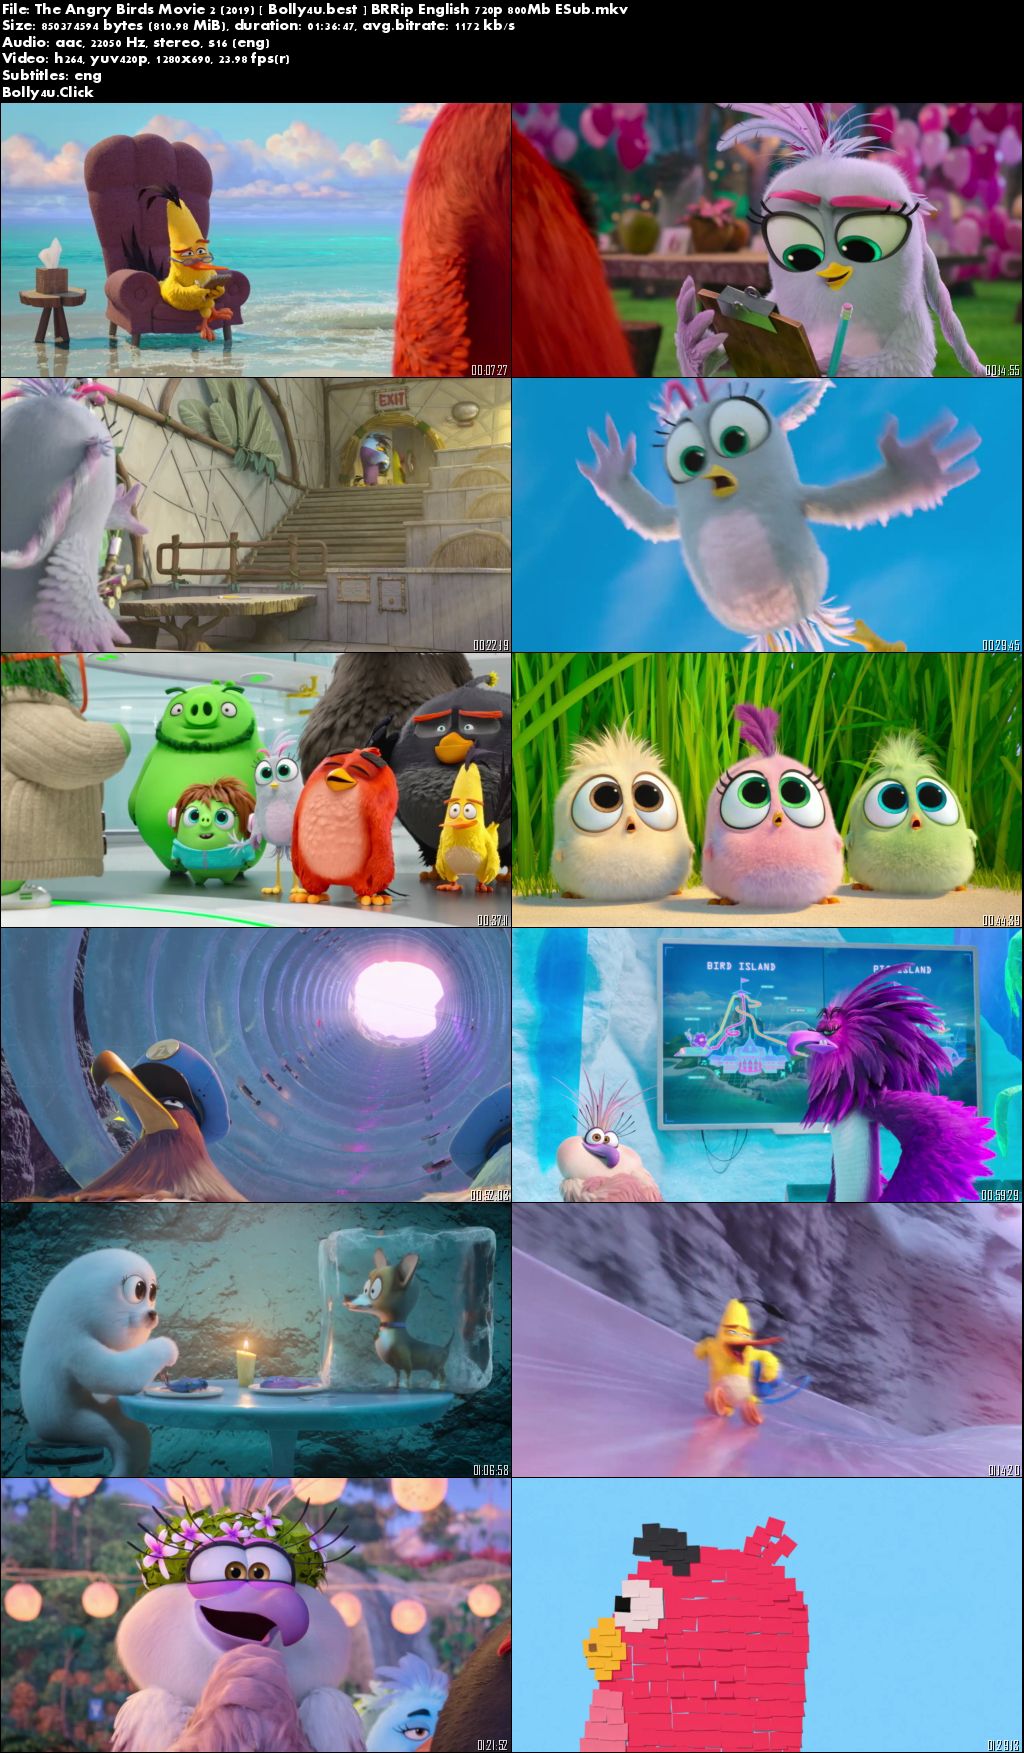 The Angry Birds Movie 2 2019 BRRip 800Mb English 720p ESub Download